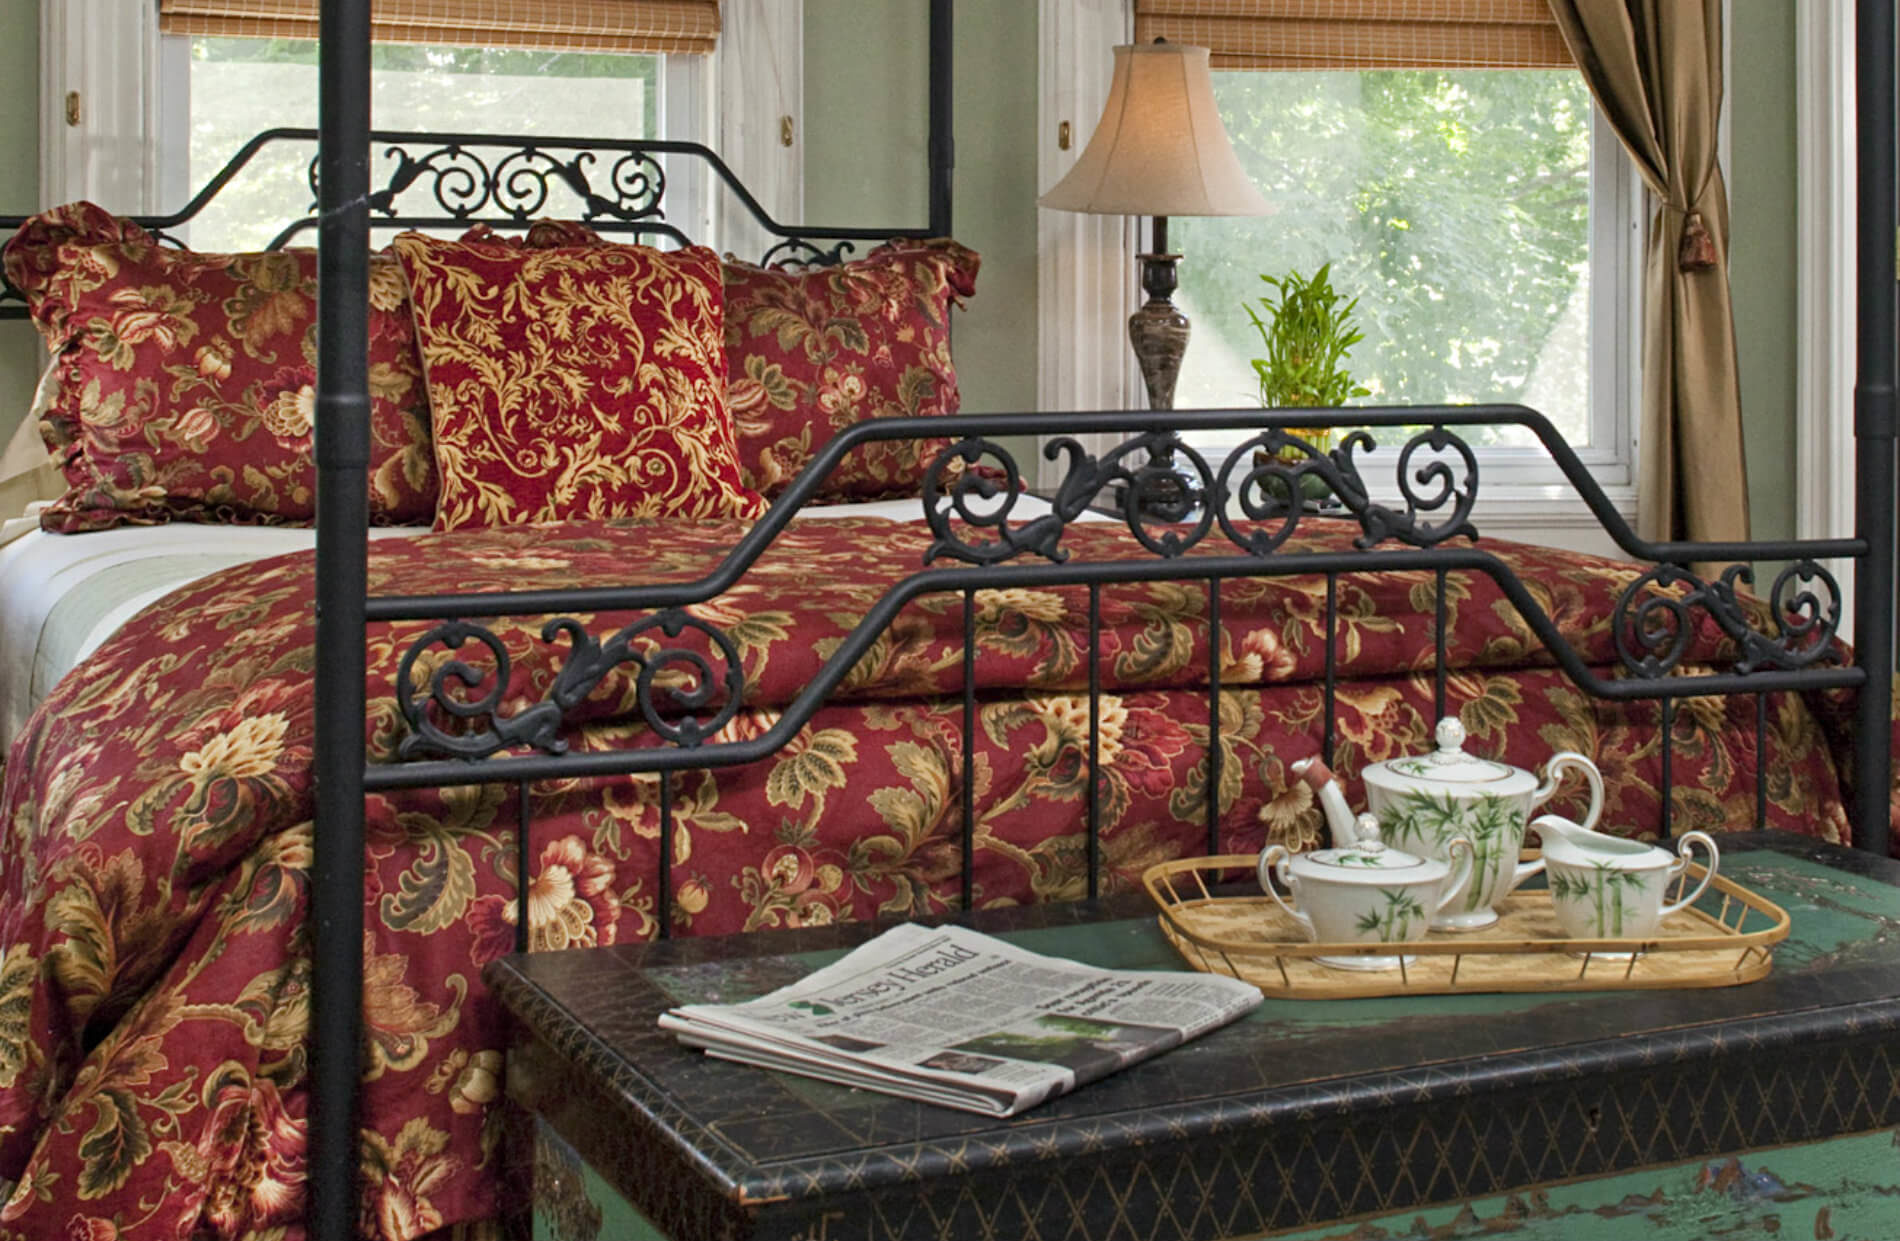 Iron bed with red and gold bedding and seat at foot of bed